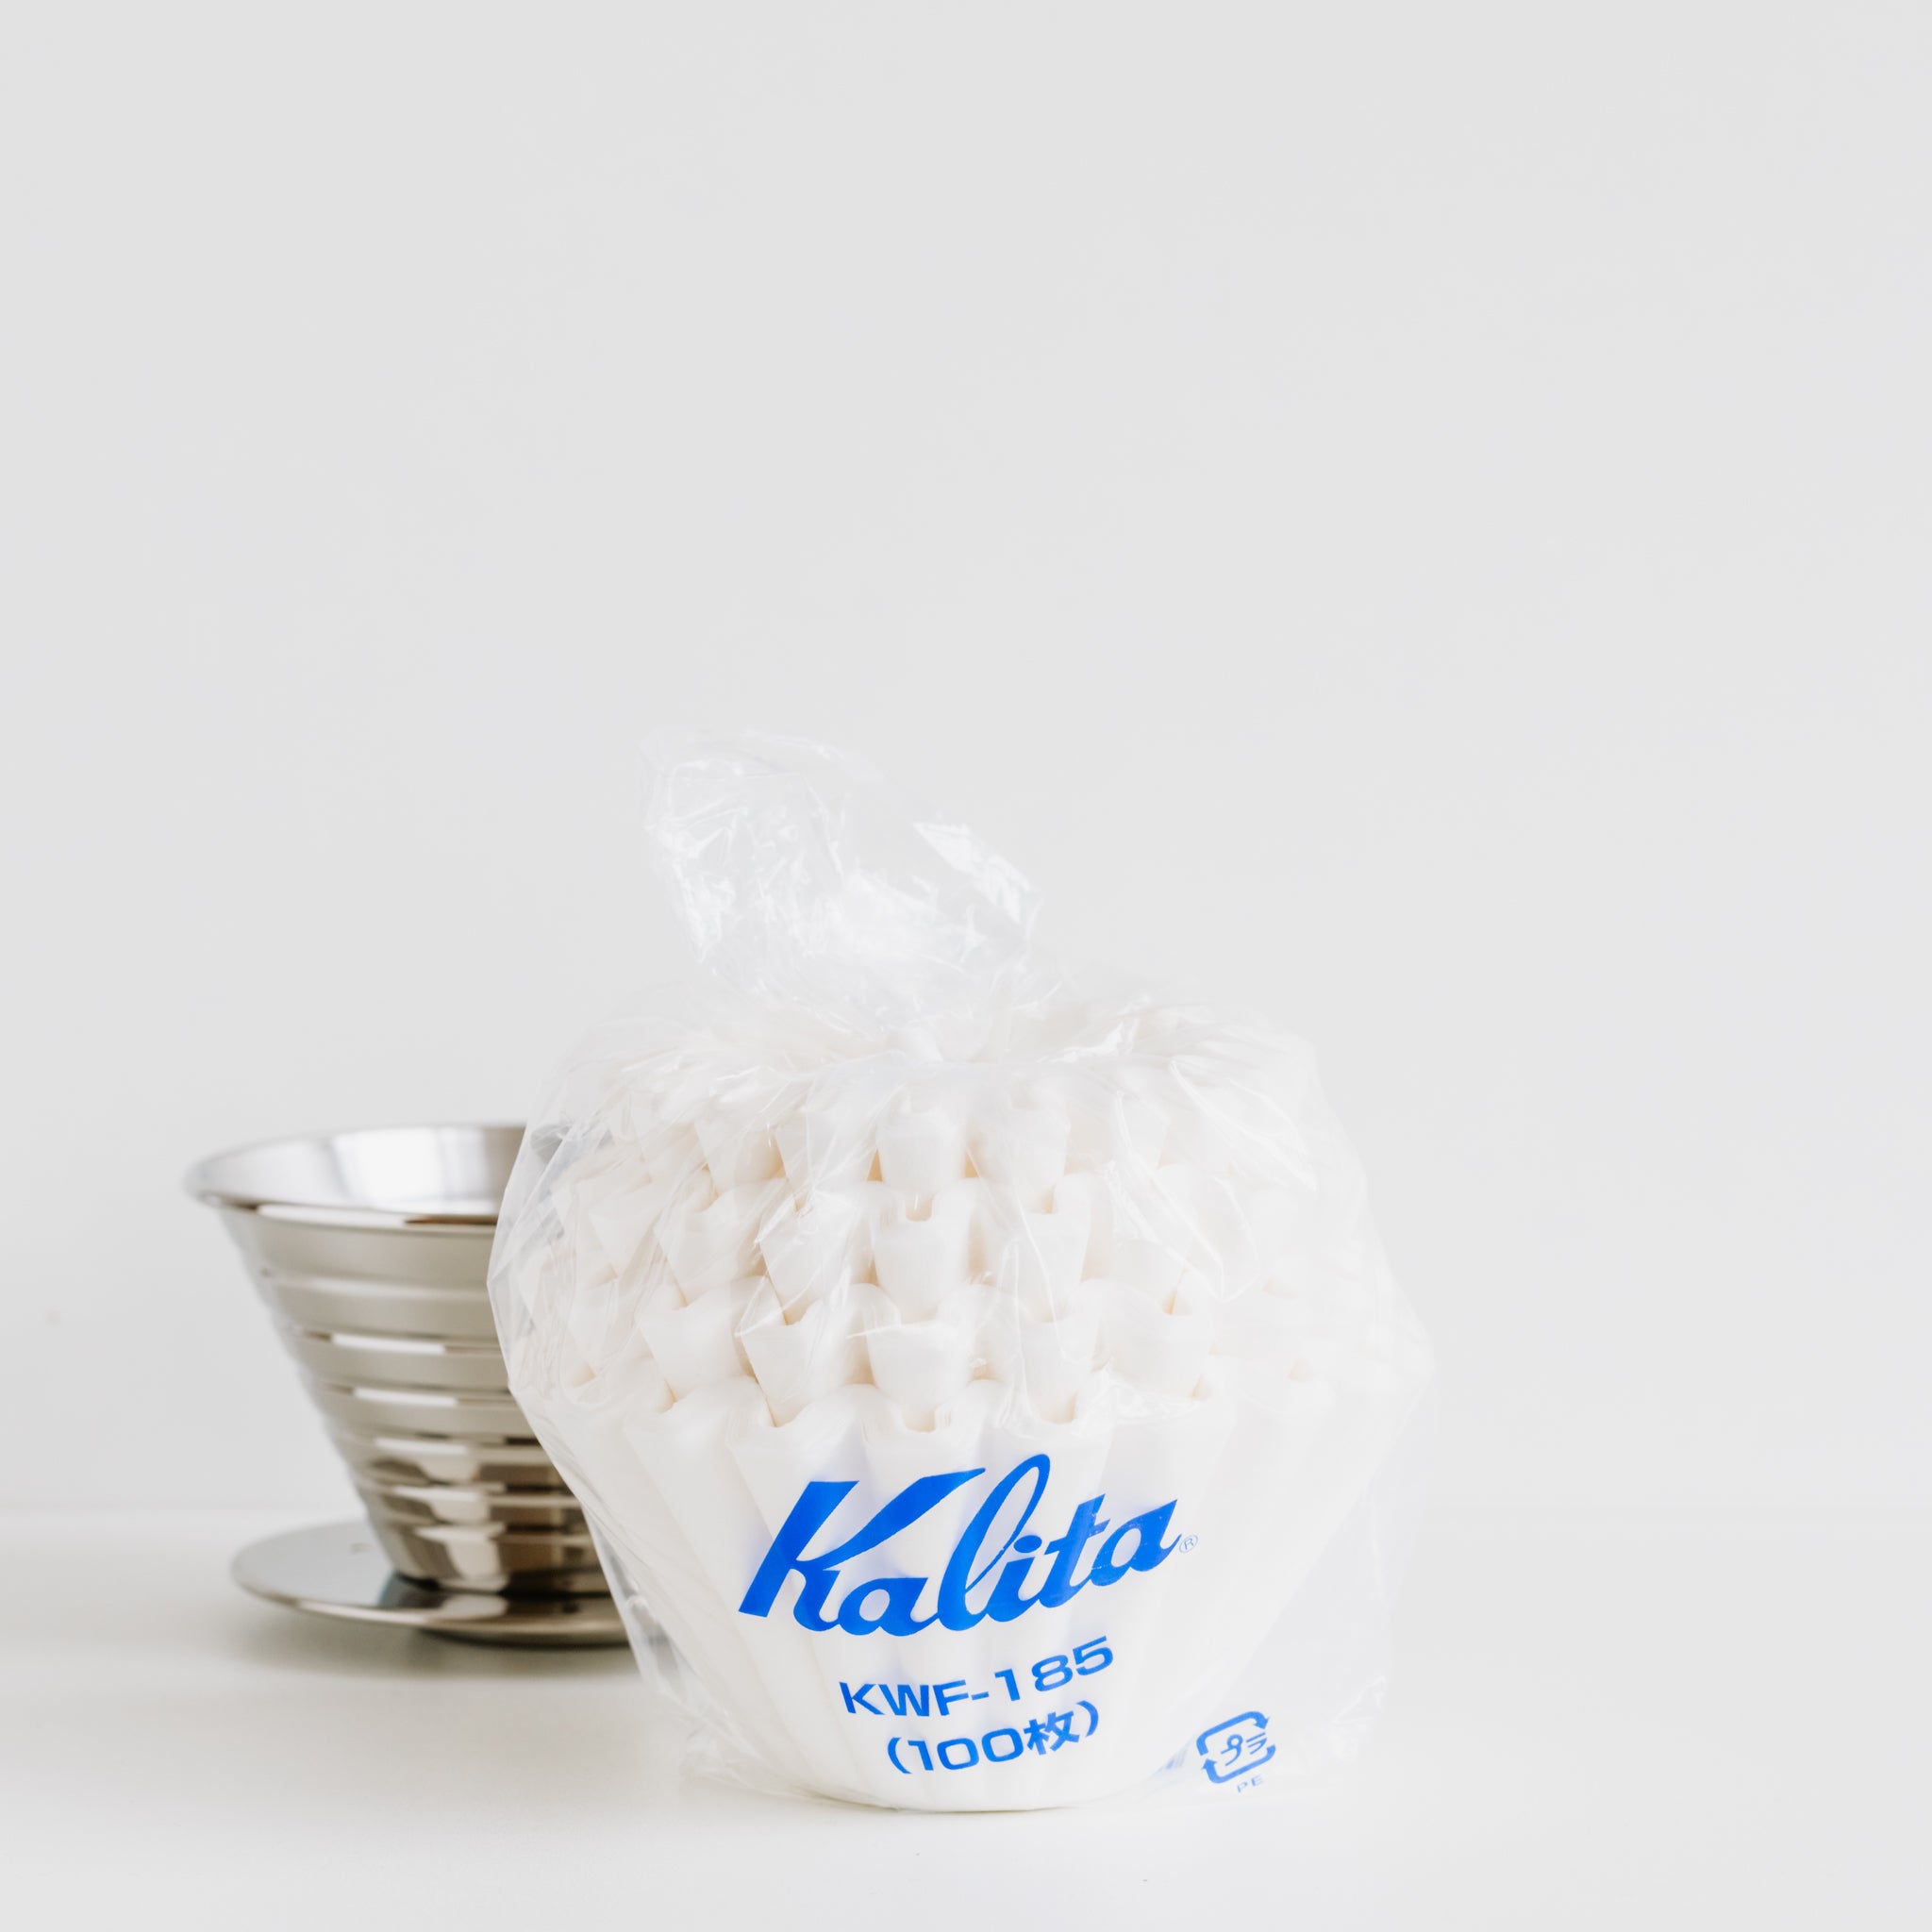 Kalita wave 185 filters with dripper on white background